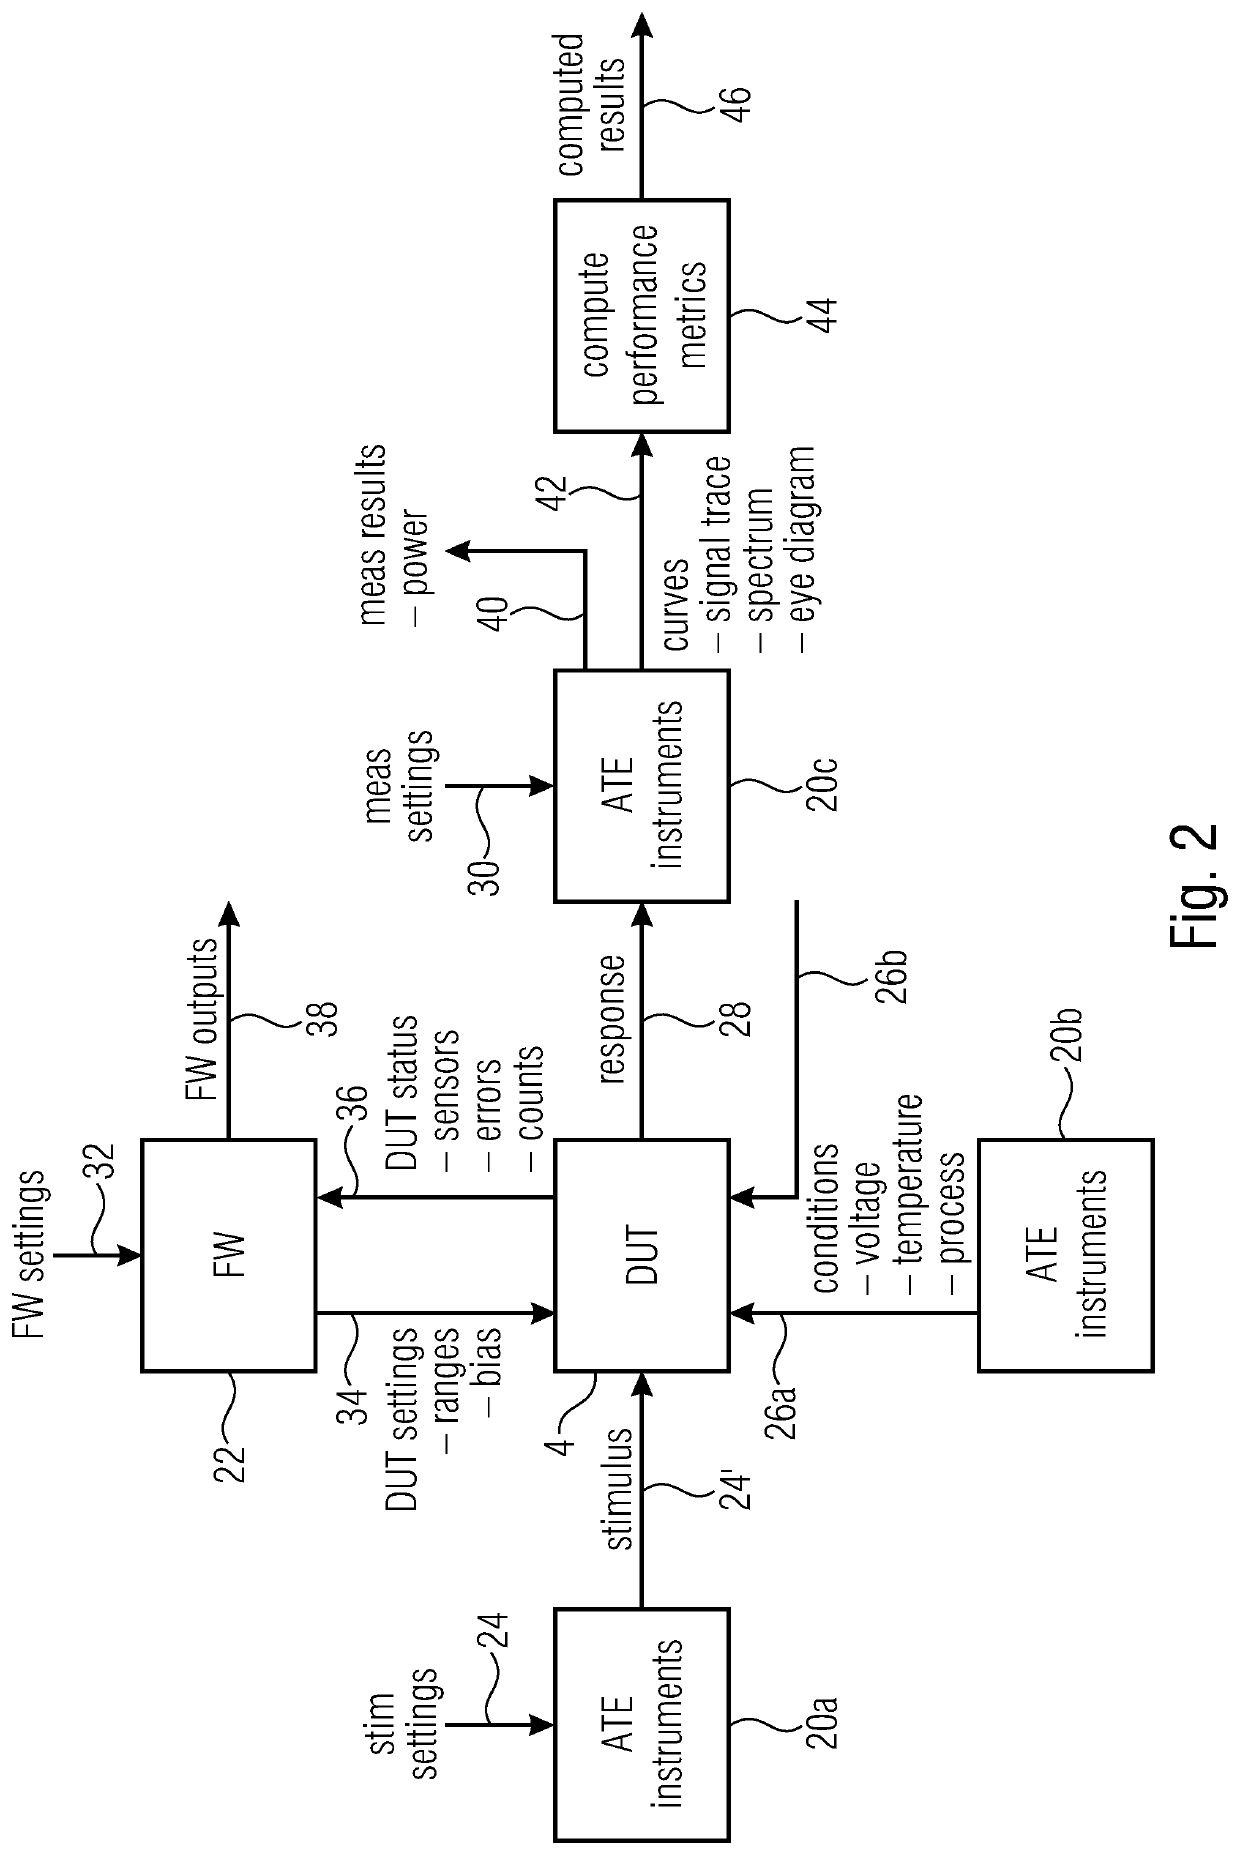 Test apparatus and method for characterizing a device under test